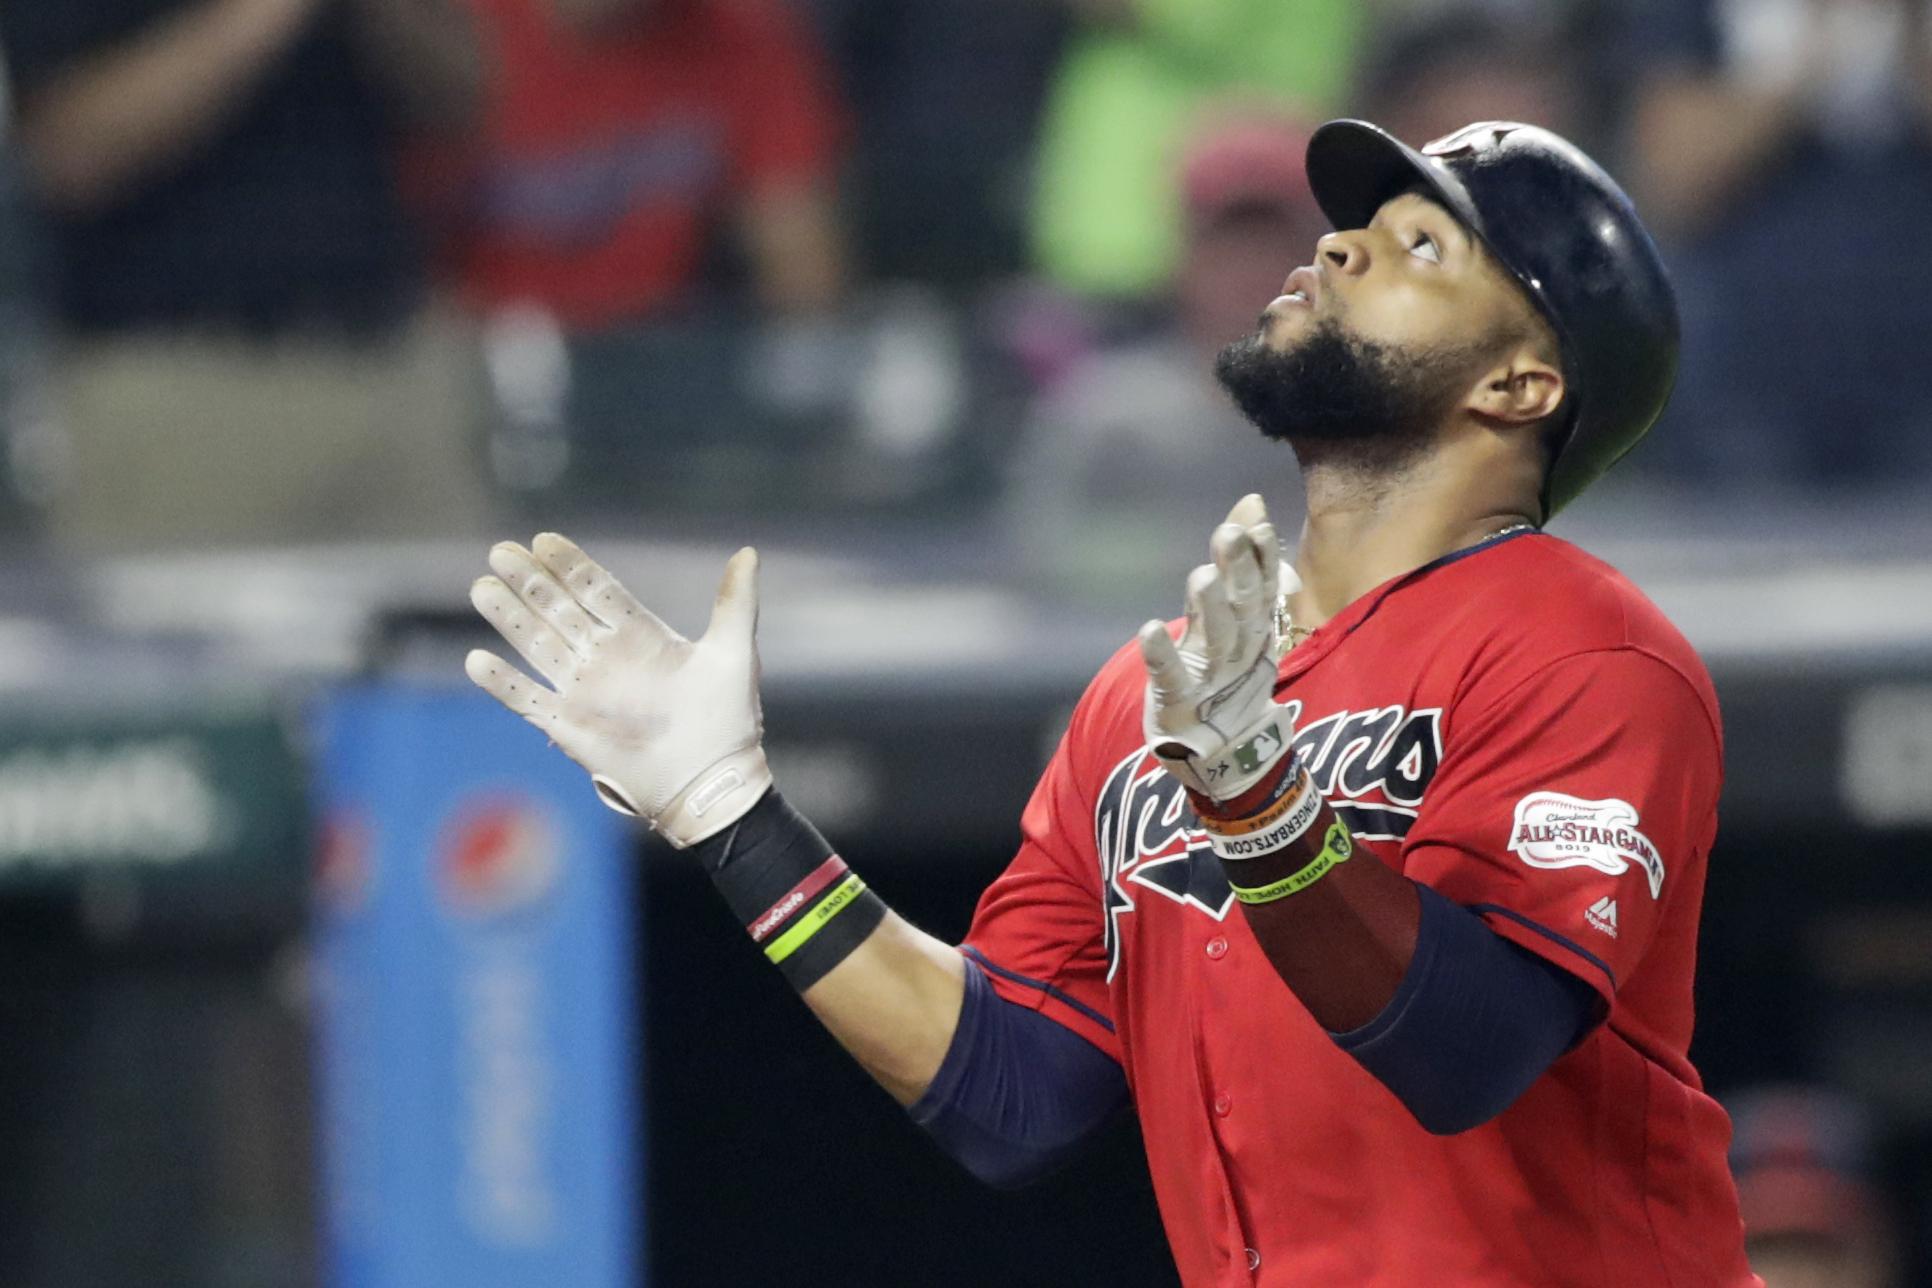 Home Run Derby 2019 predictions: Cleveland plays home to slugfest